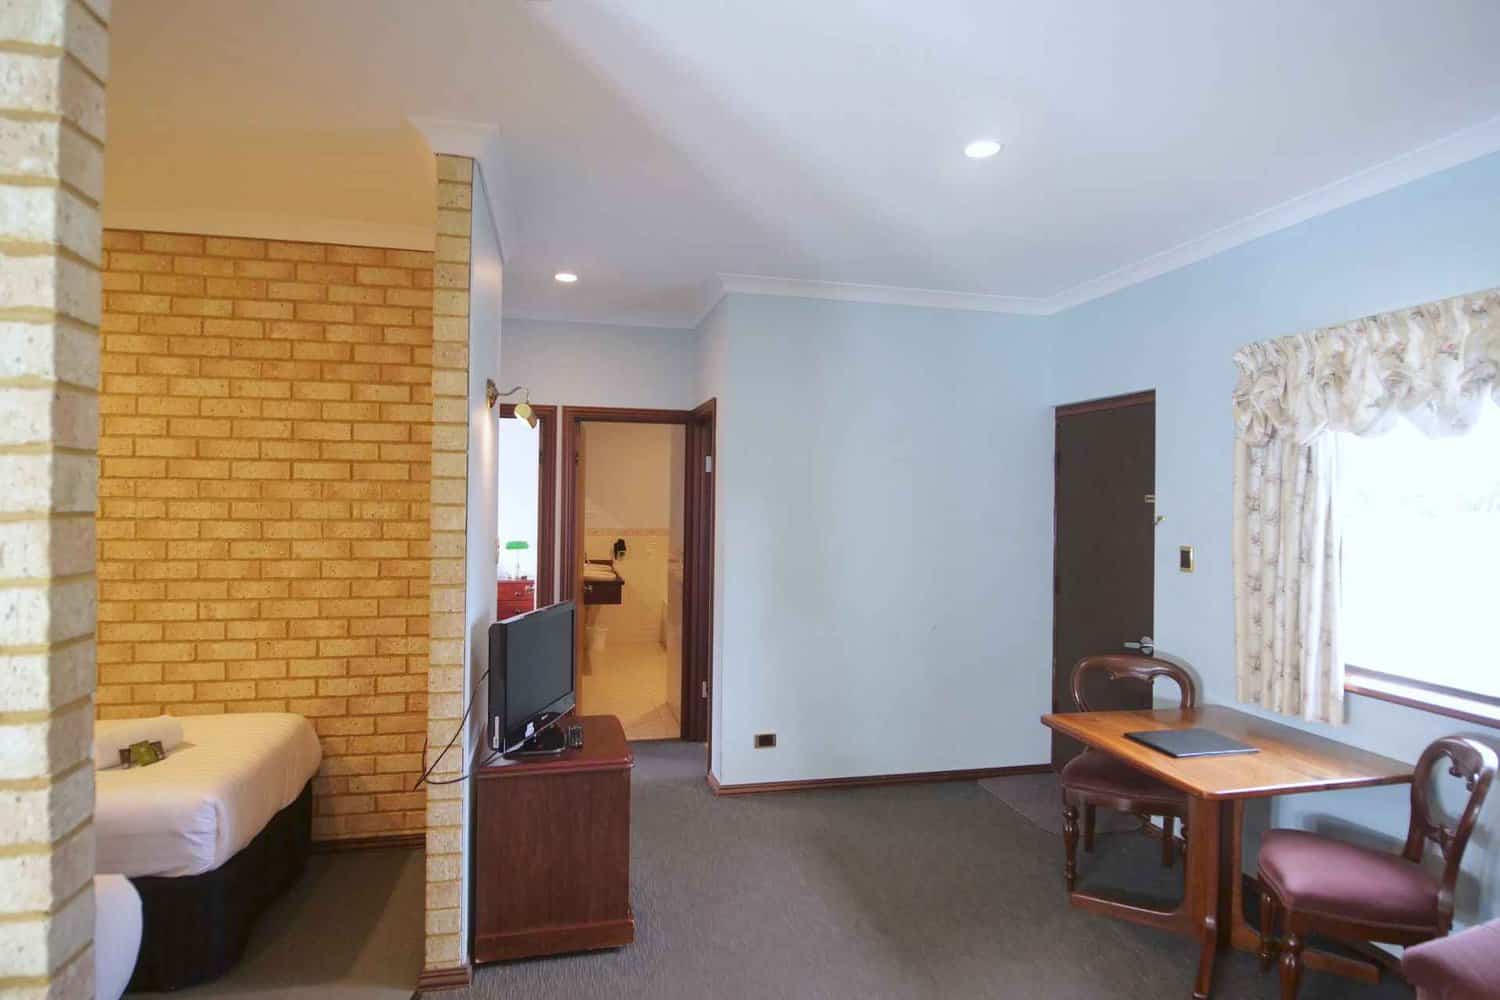 Bright and airy hotel suite featuring a sleeping area with a single bed, a flat-screen TV on a wooden stand, and a work desk with chairs, showcasing a comfortable and functional space for guests.